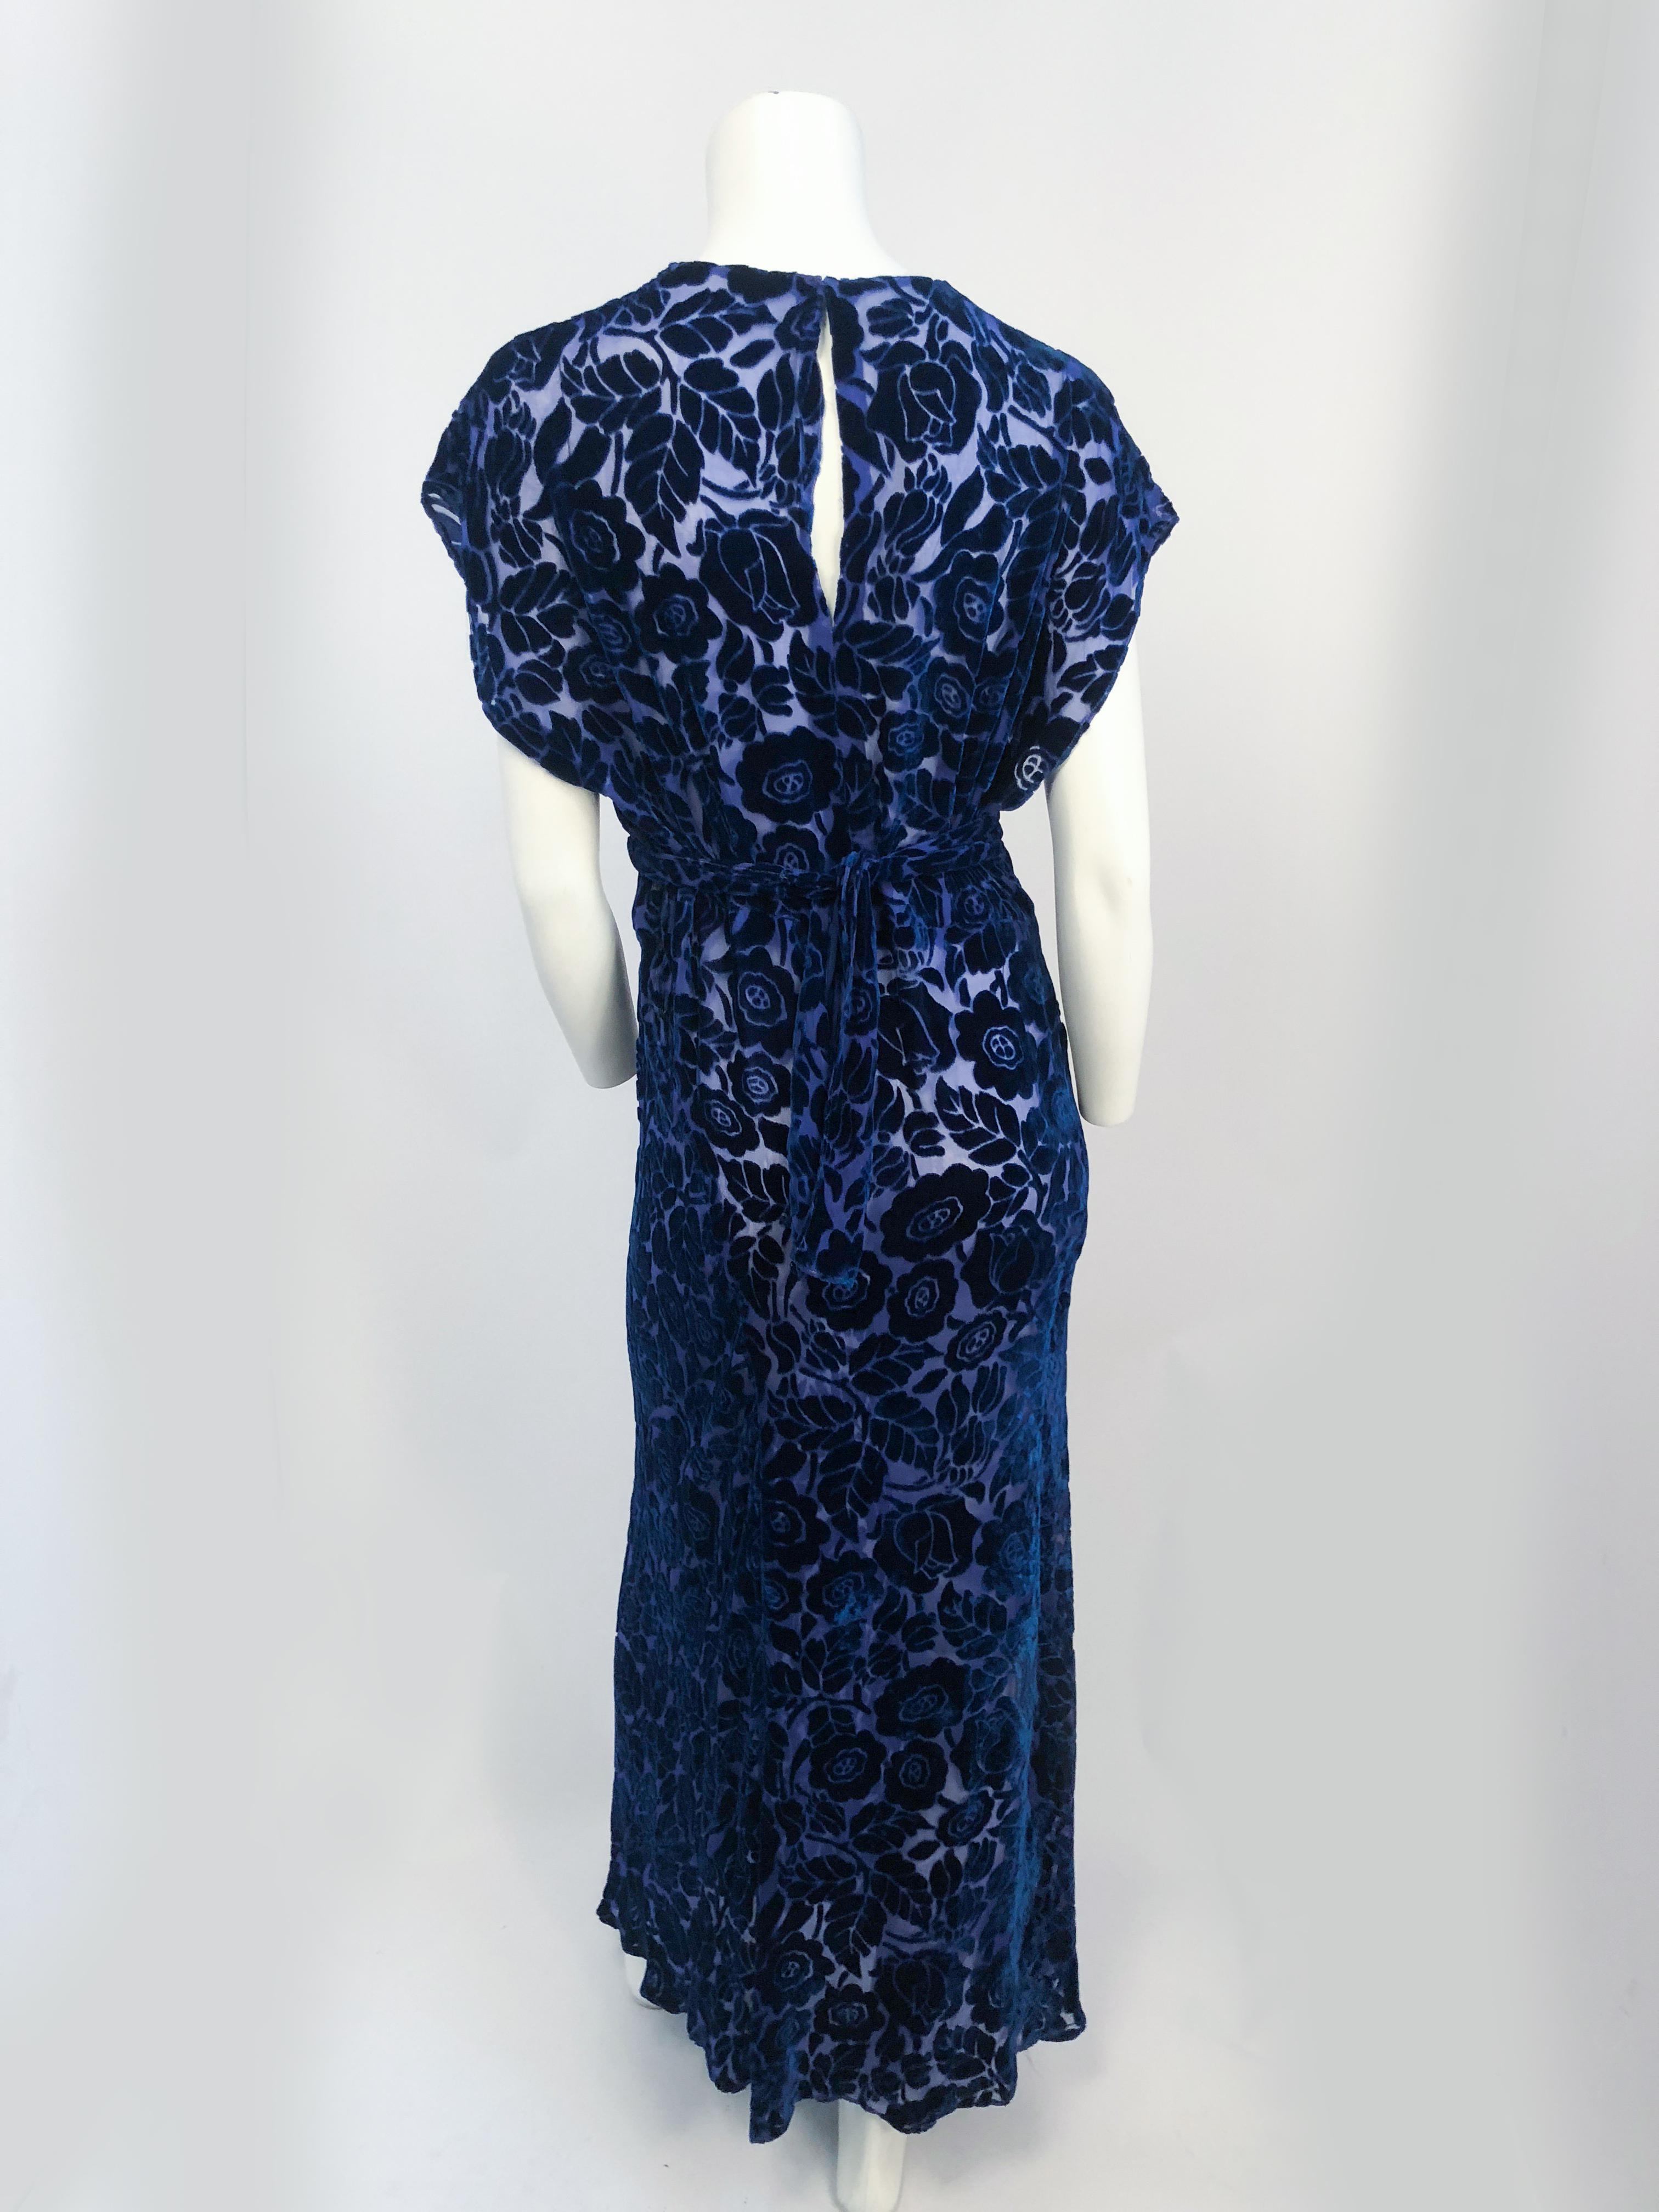 1930s Royal Blue Art Deco Cut Velvet Gown. Royal blue cut velvet gown with an art deco pattern. Sash around waist that ties at the back.